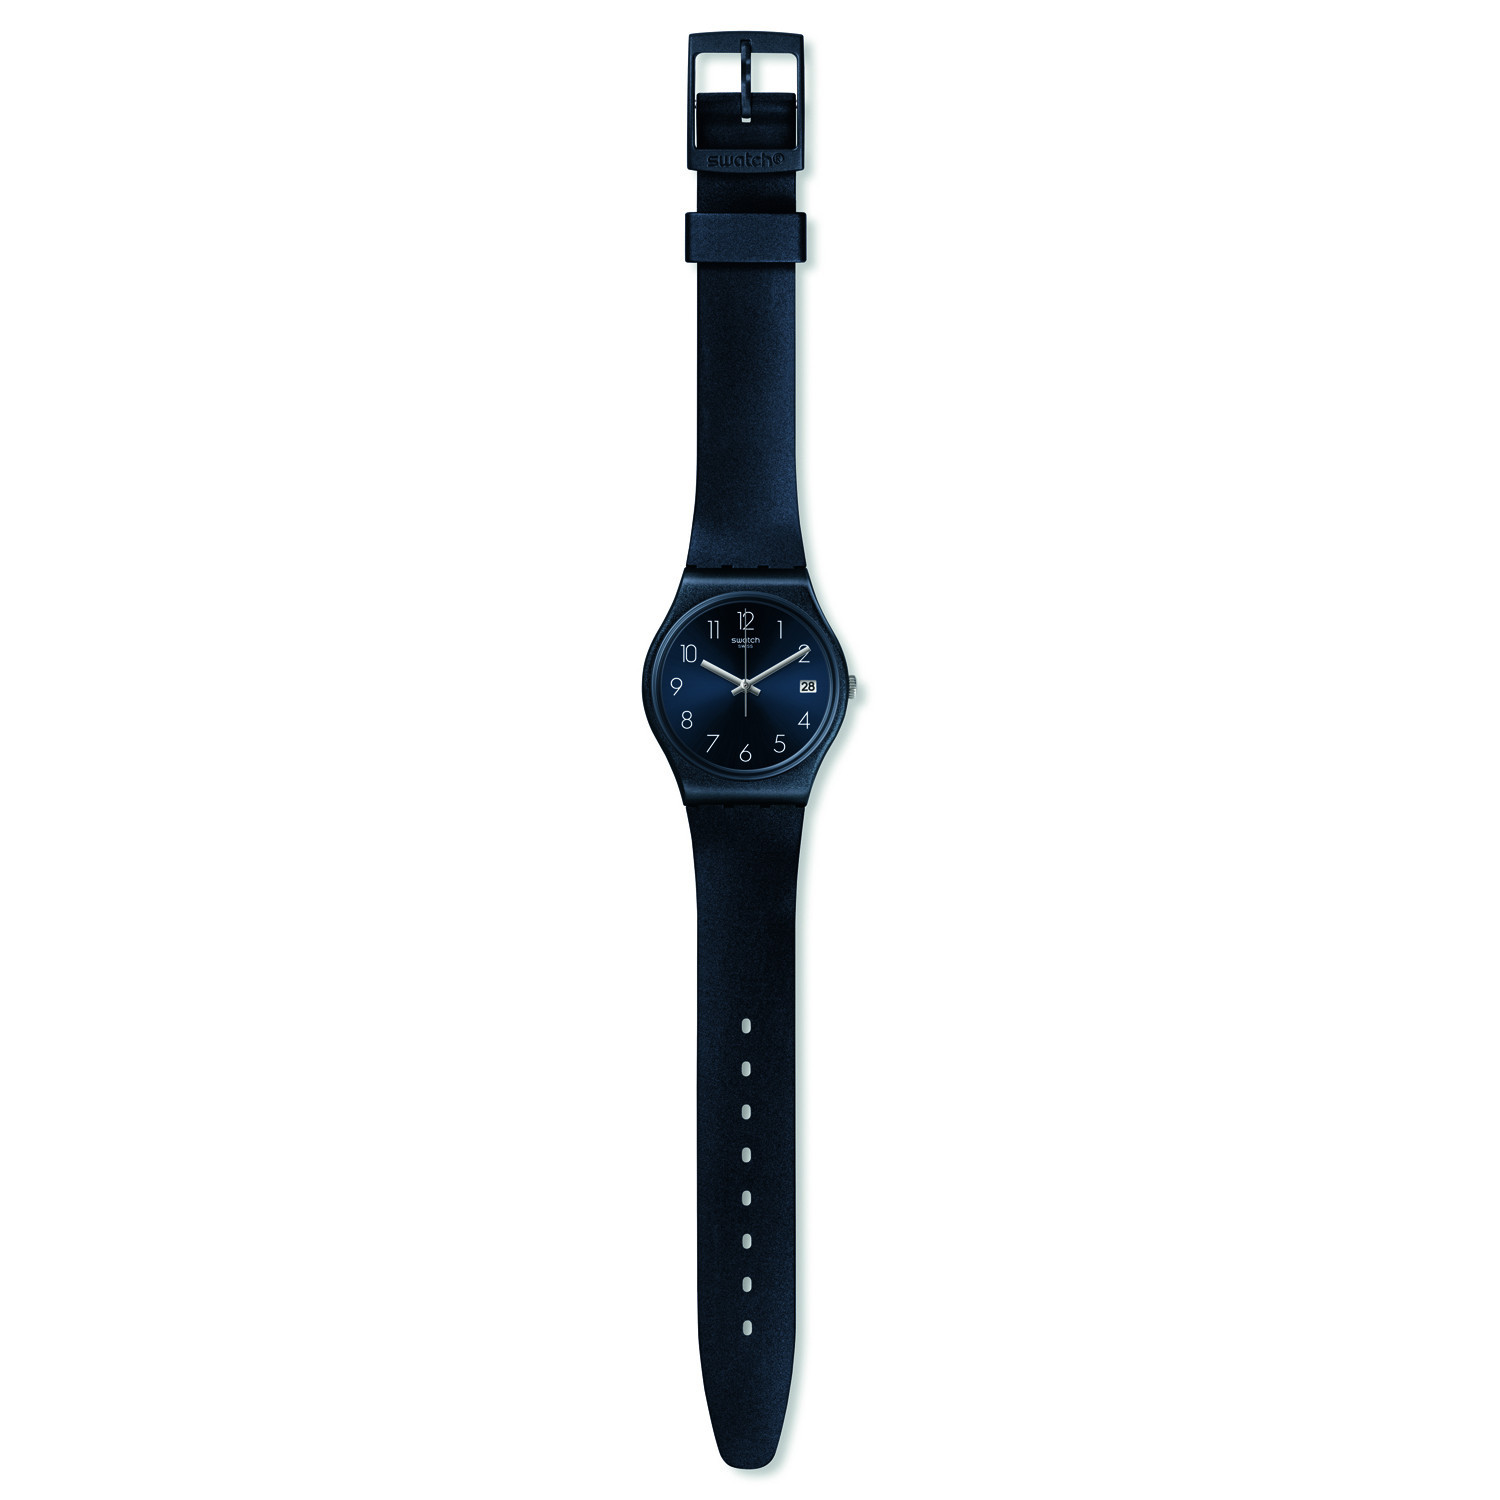 Montre femme Swatch Naitbaya
Collection Core Refresh